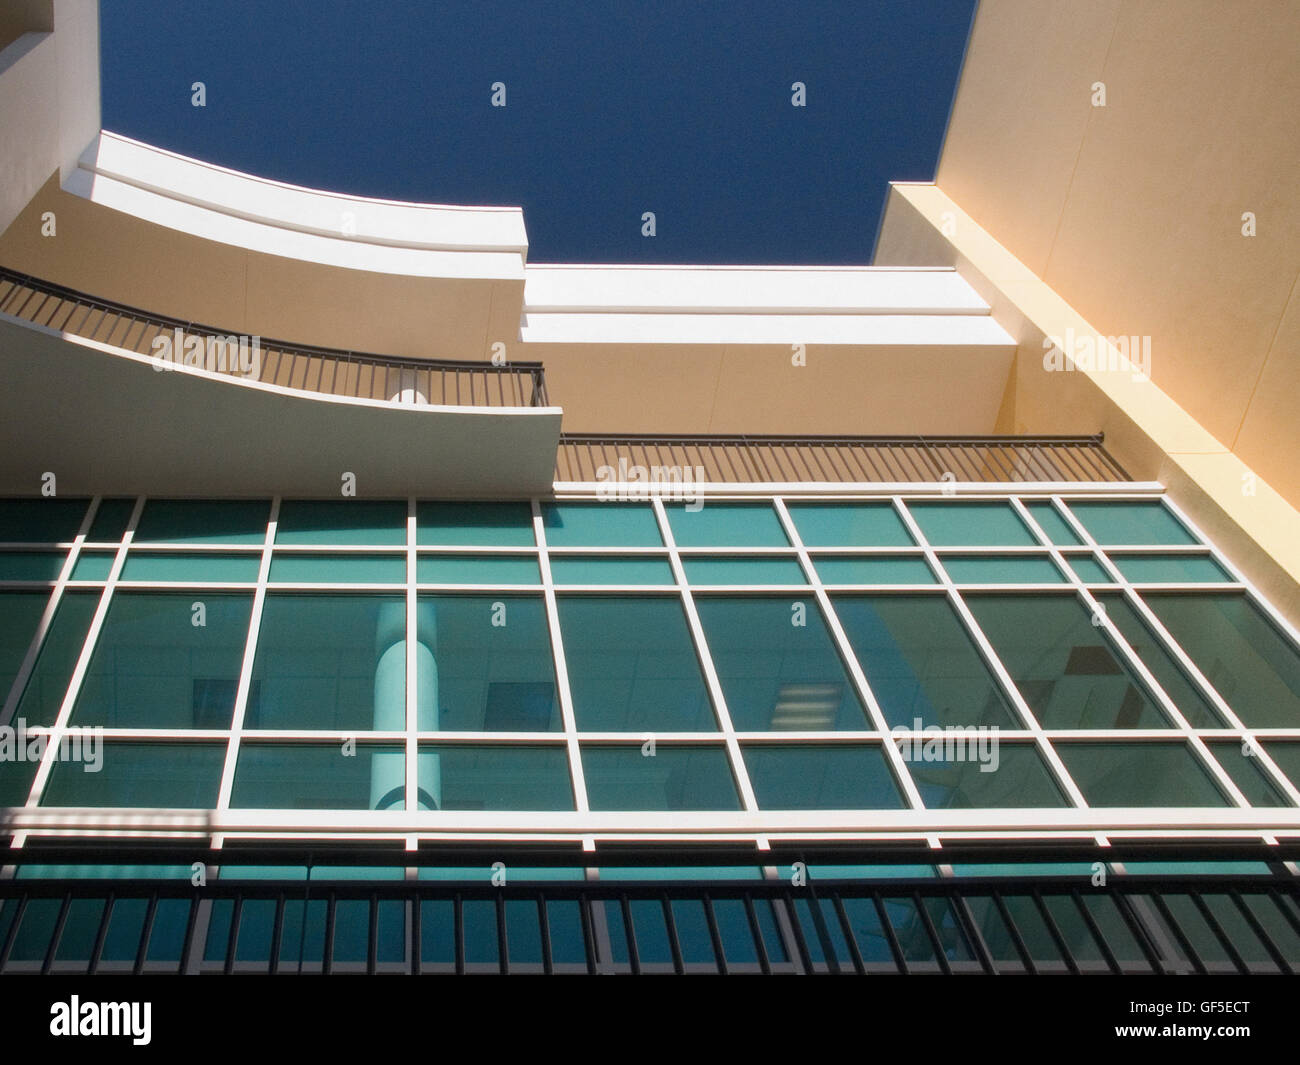 An exterior view of a modernized 'art deco' styled building as a photographic abstract.  Located in Fort Myers, Florida, USA. Stock Photo